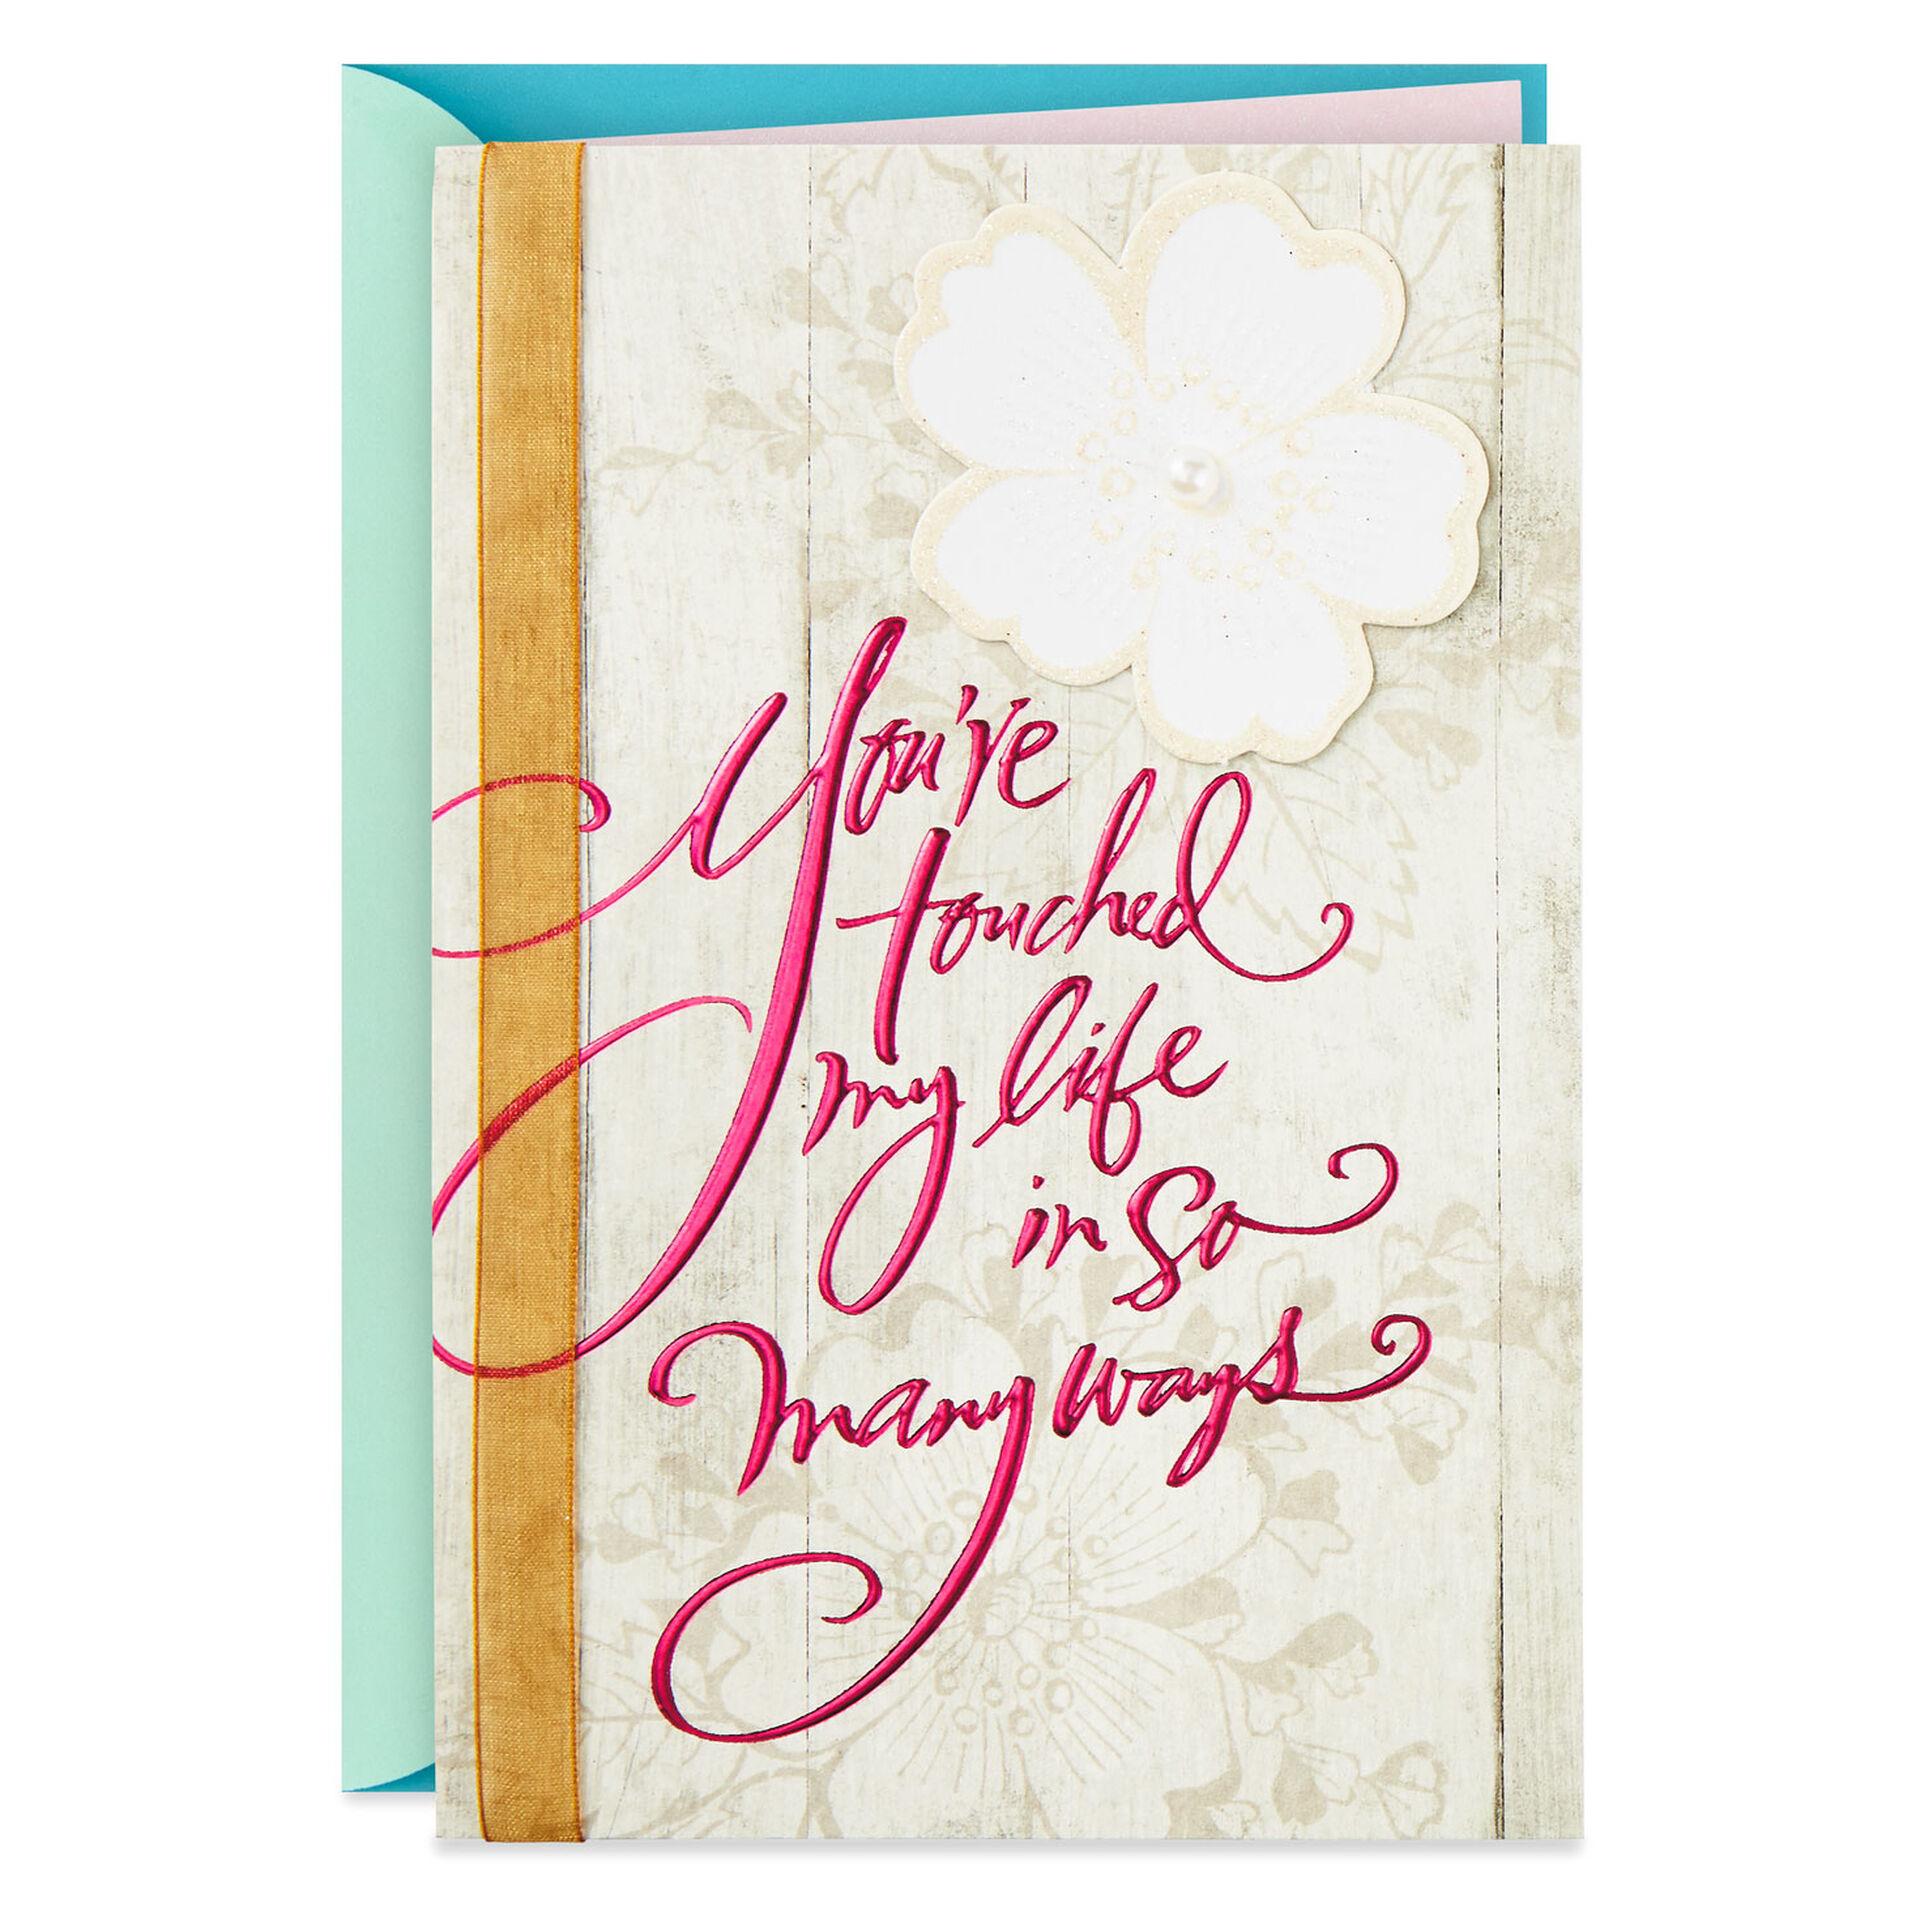 Youve-Touched-My-Life-Thank-You-Card_699T2135_01